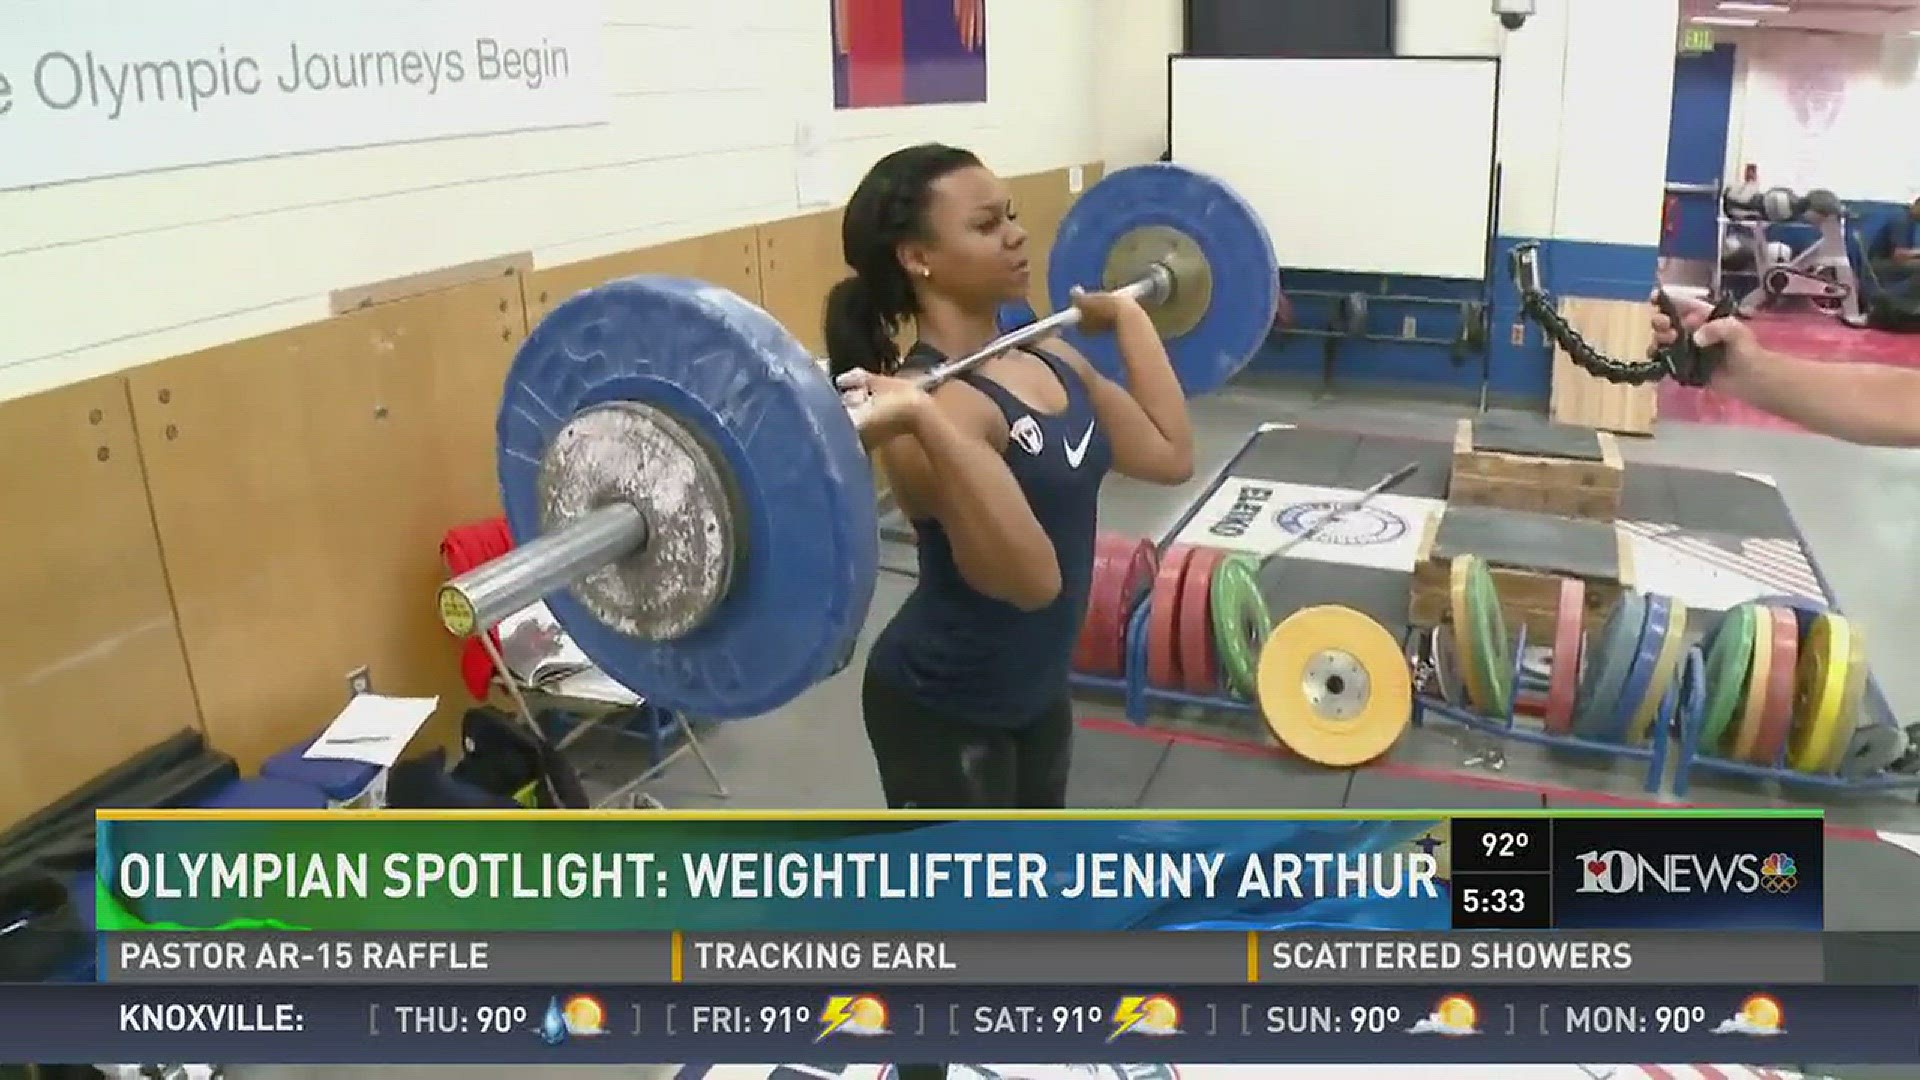 Gainesville native Jenny Arthur will represent the United States in the 75kg weightlifting class in Rio. She will lift almost three times her body weight in competition. August 3, 2016.